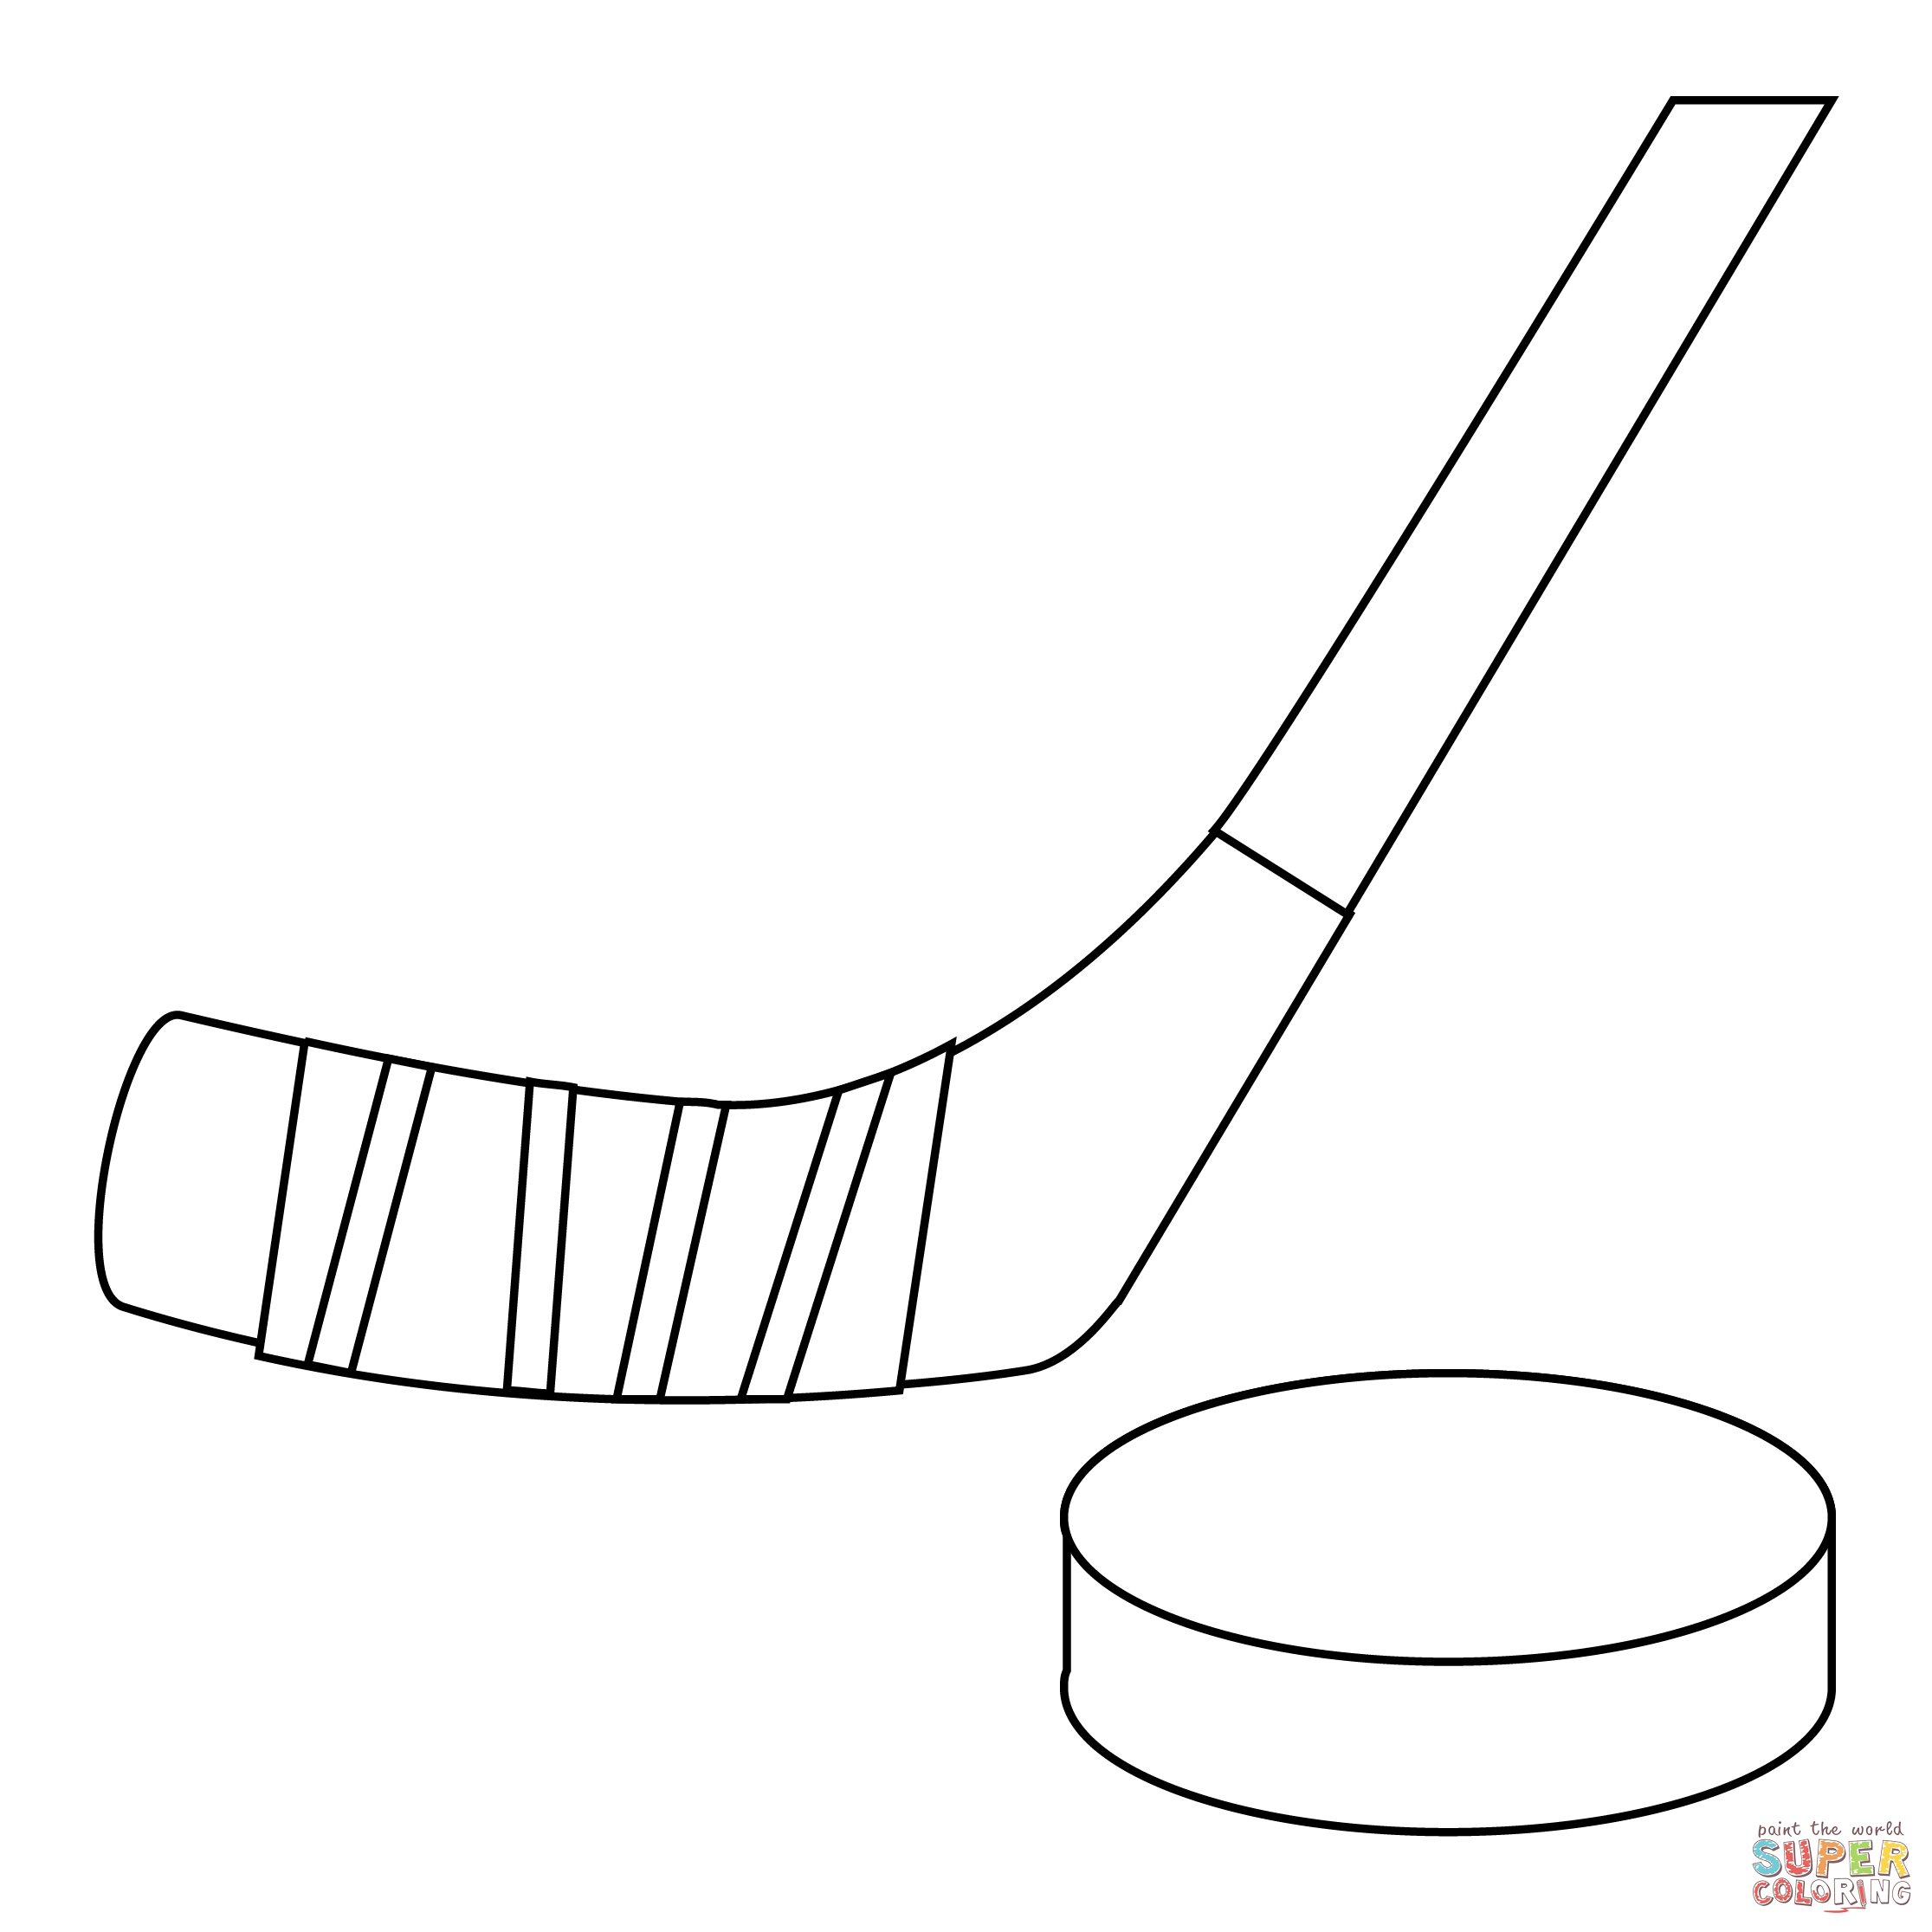 Ice Hockey coloring page | Free Printable Coloring Pages